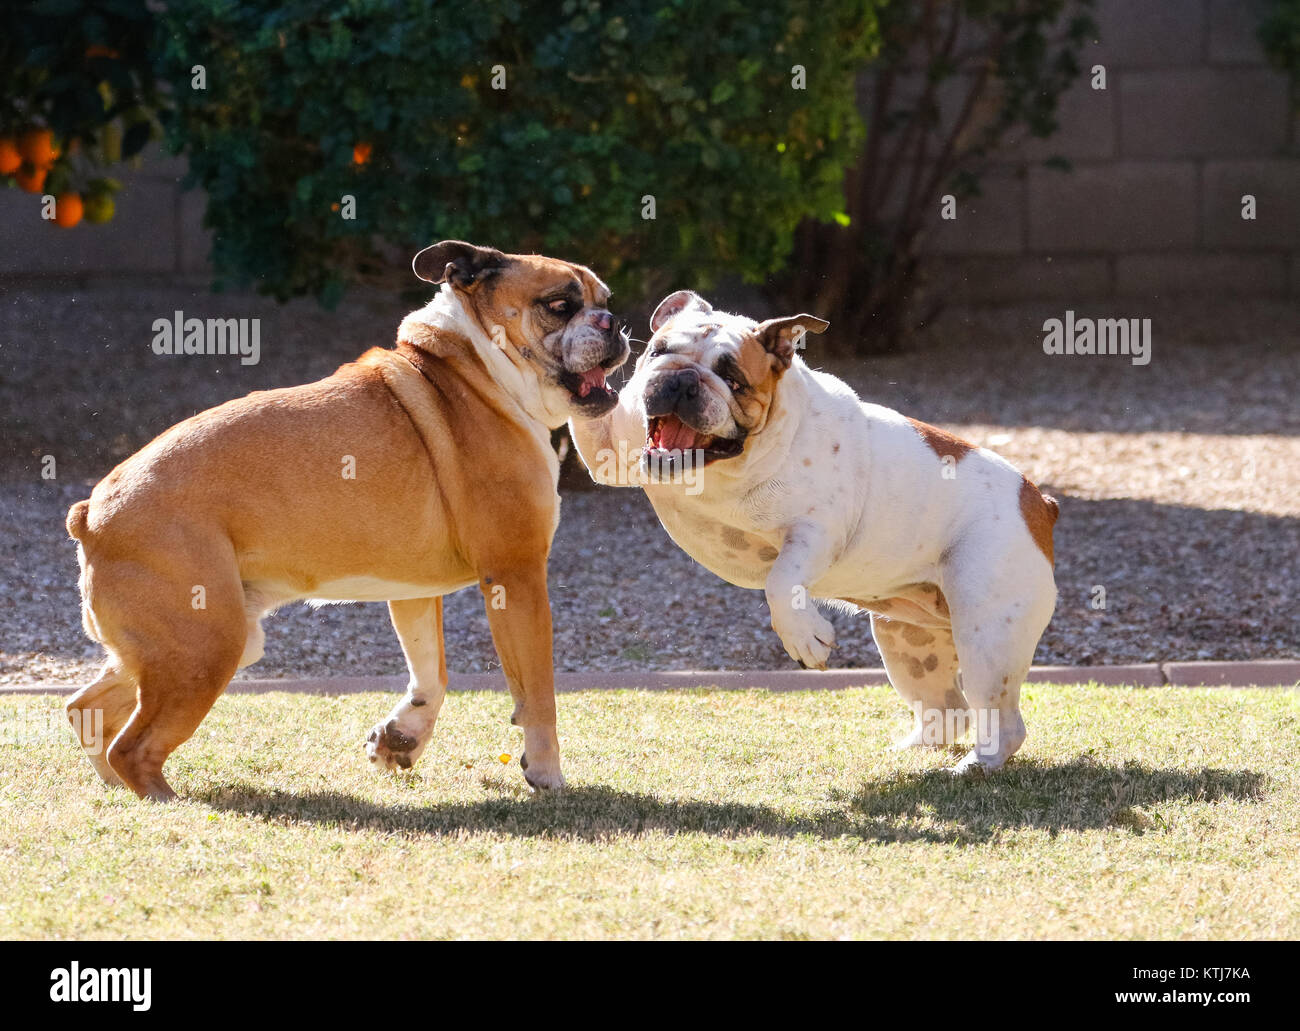 White bulldog playing with a red bulldog on the grass Stock Photo